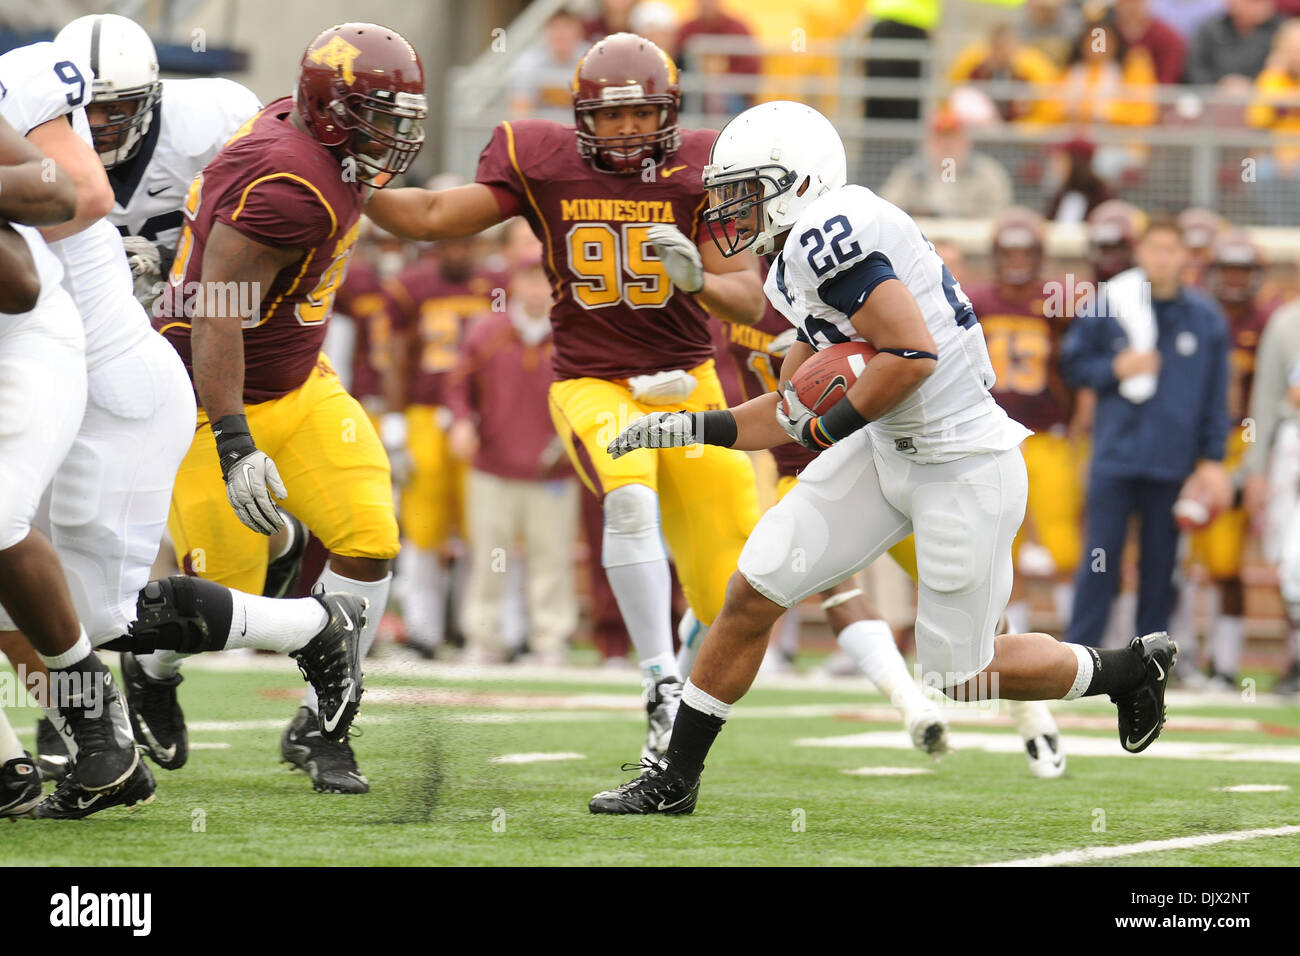 Oct. 22, 2010 - Minneapolis, Minnesota, United States of America - Penn State University tail back Evan Royster (#22) in game action during the game between the Minnesota Gophers and the Penn State Nittany Lions at the TCF Stadium in Minneapolis, Minnesota.  Penn State defeats  Minnesota 33-21. (Credit Image: © Marilyn Indahl/Southcreek Global/ZUMApress.com) Stock Photo